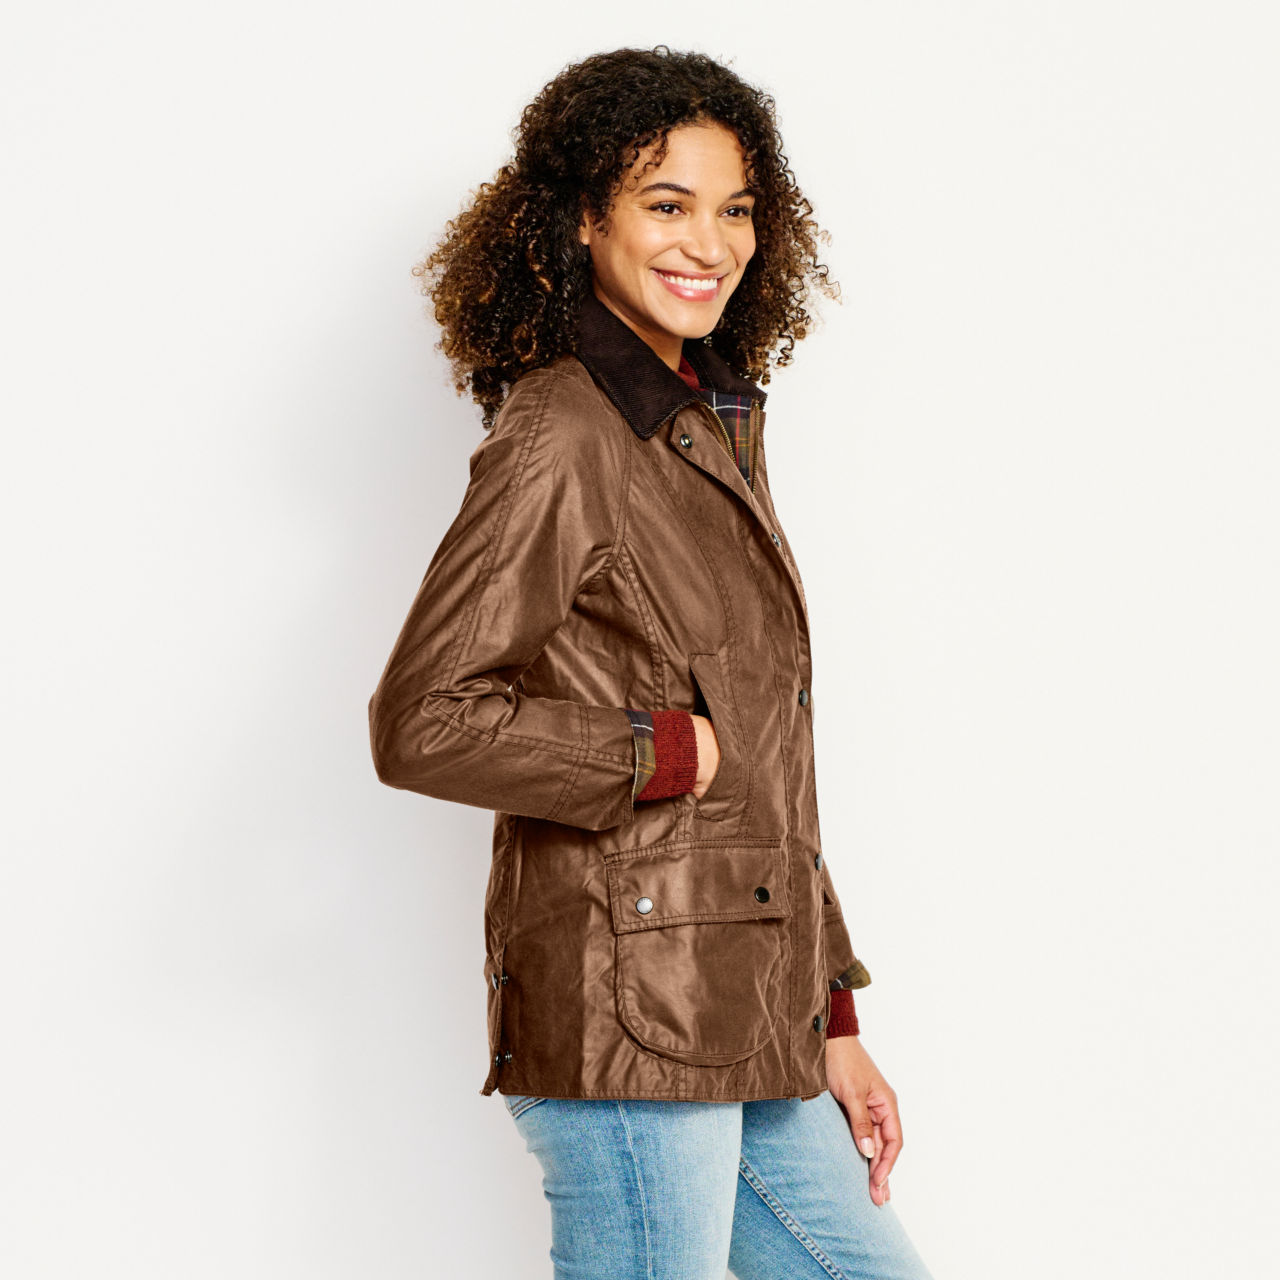 Barbour® Women’s Classic Beadnell Jacket - BARK - ORVIS EXCLUSIVE image number 3